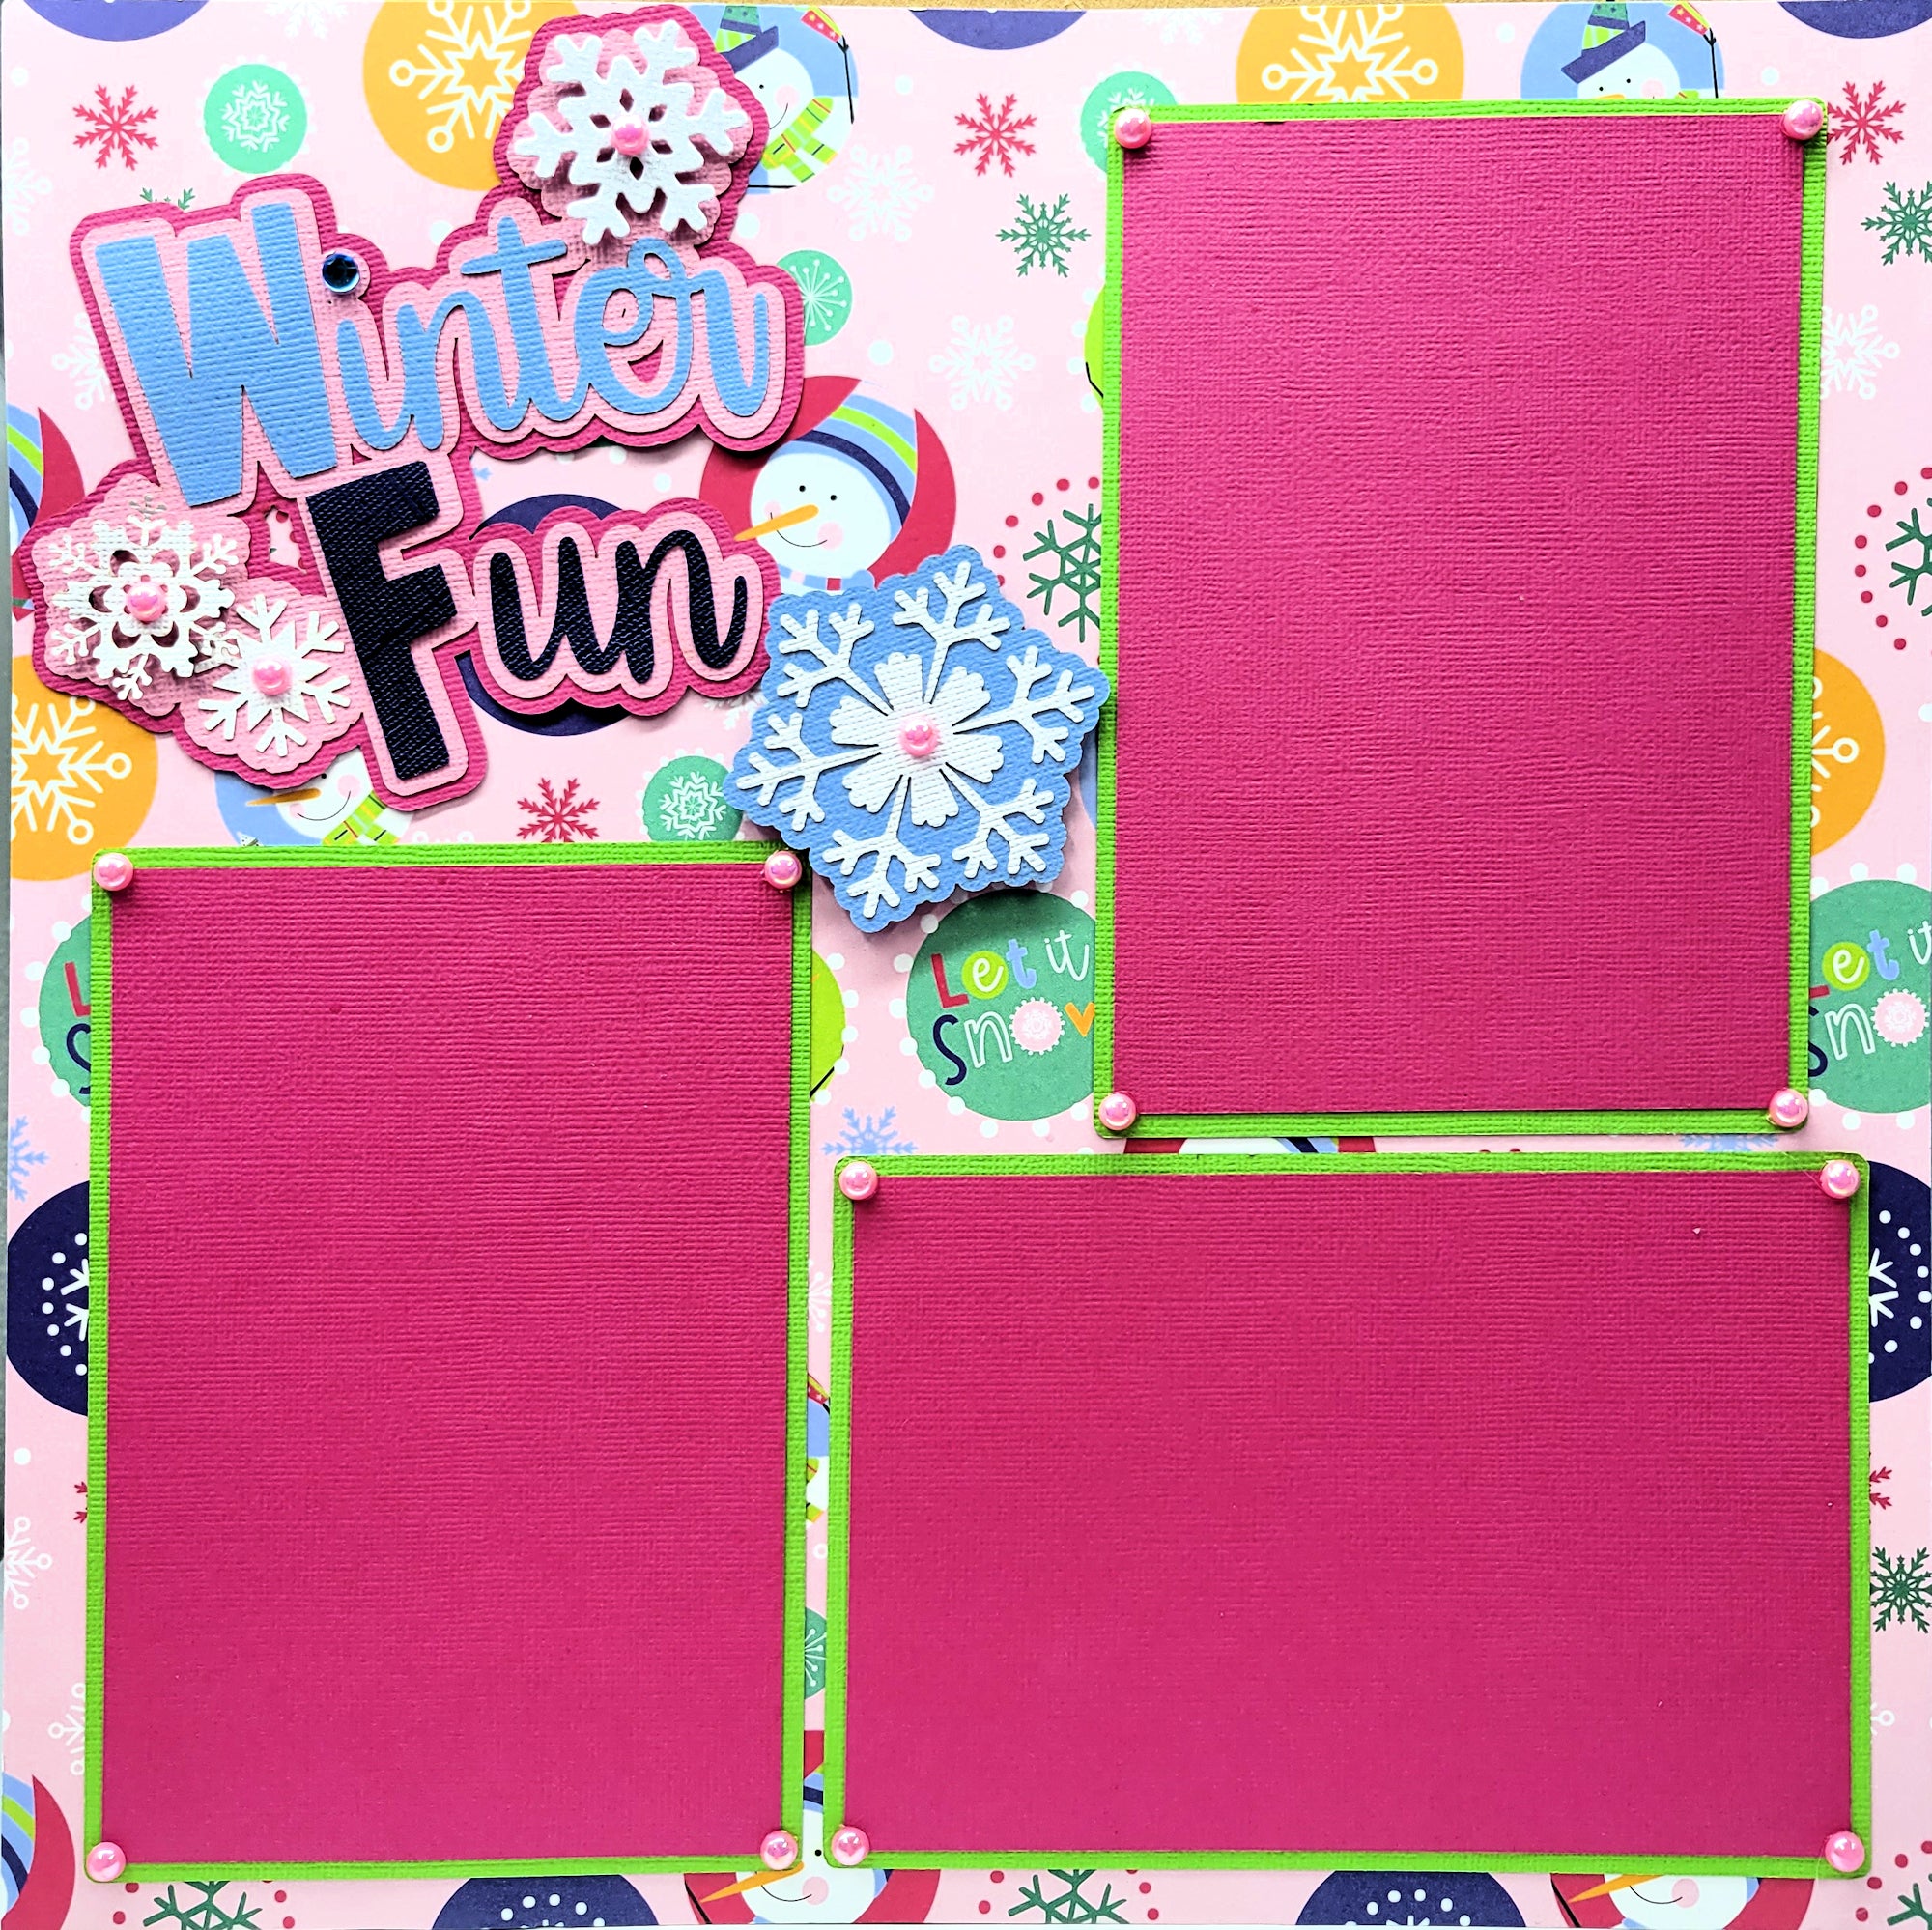 Winter Fun (2) - 12 x 12 Pages, Fully-Assembled & Hand-Crafted 3D Scrapbook Premade by SSC Designs